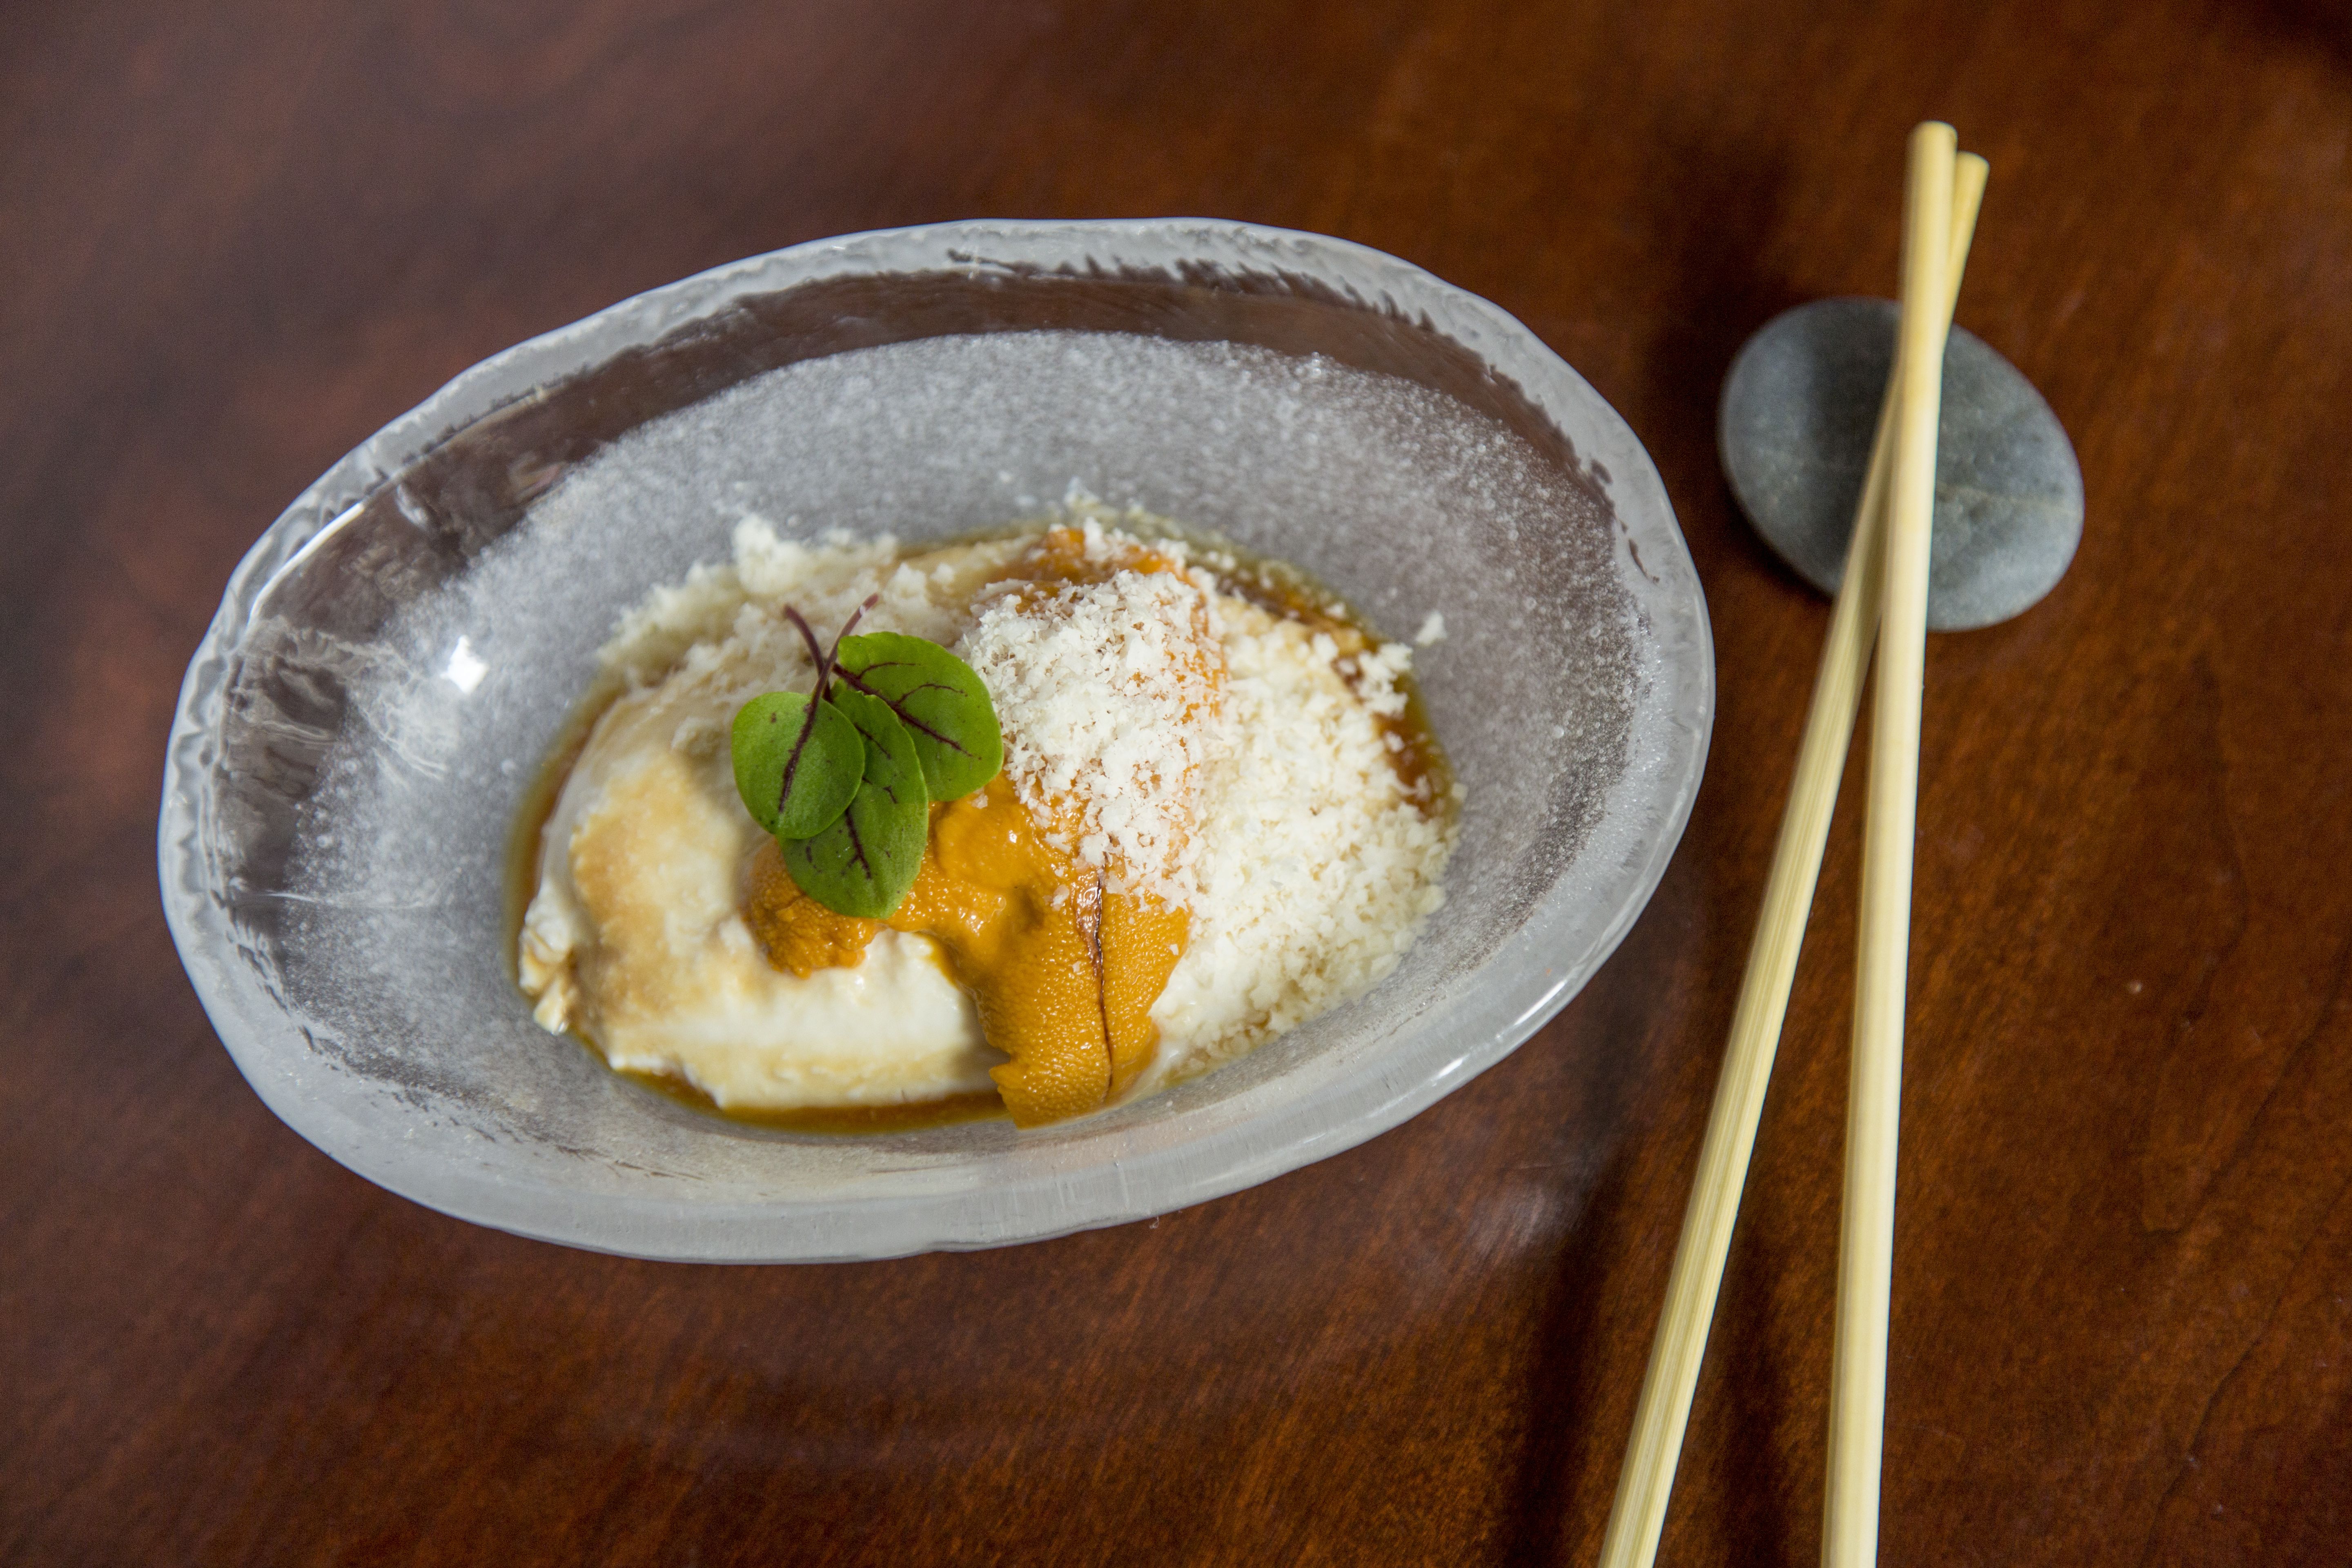 House-made-Cold-Tofu-with-Uni-Parmesan-and-Yuzu-Soy.jpg